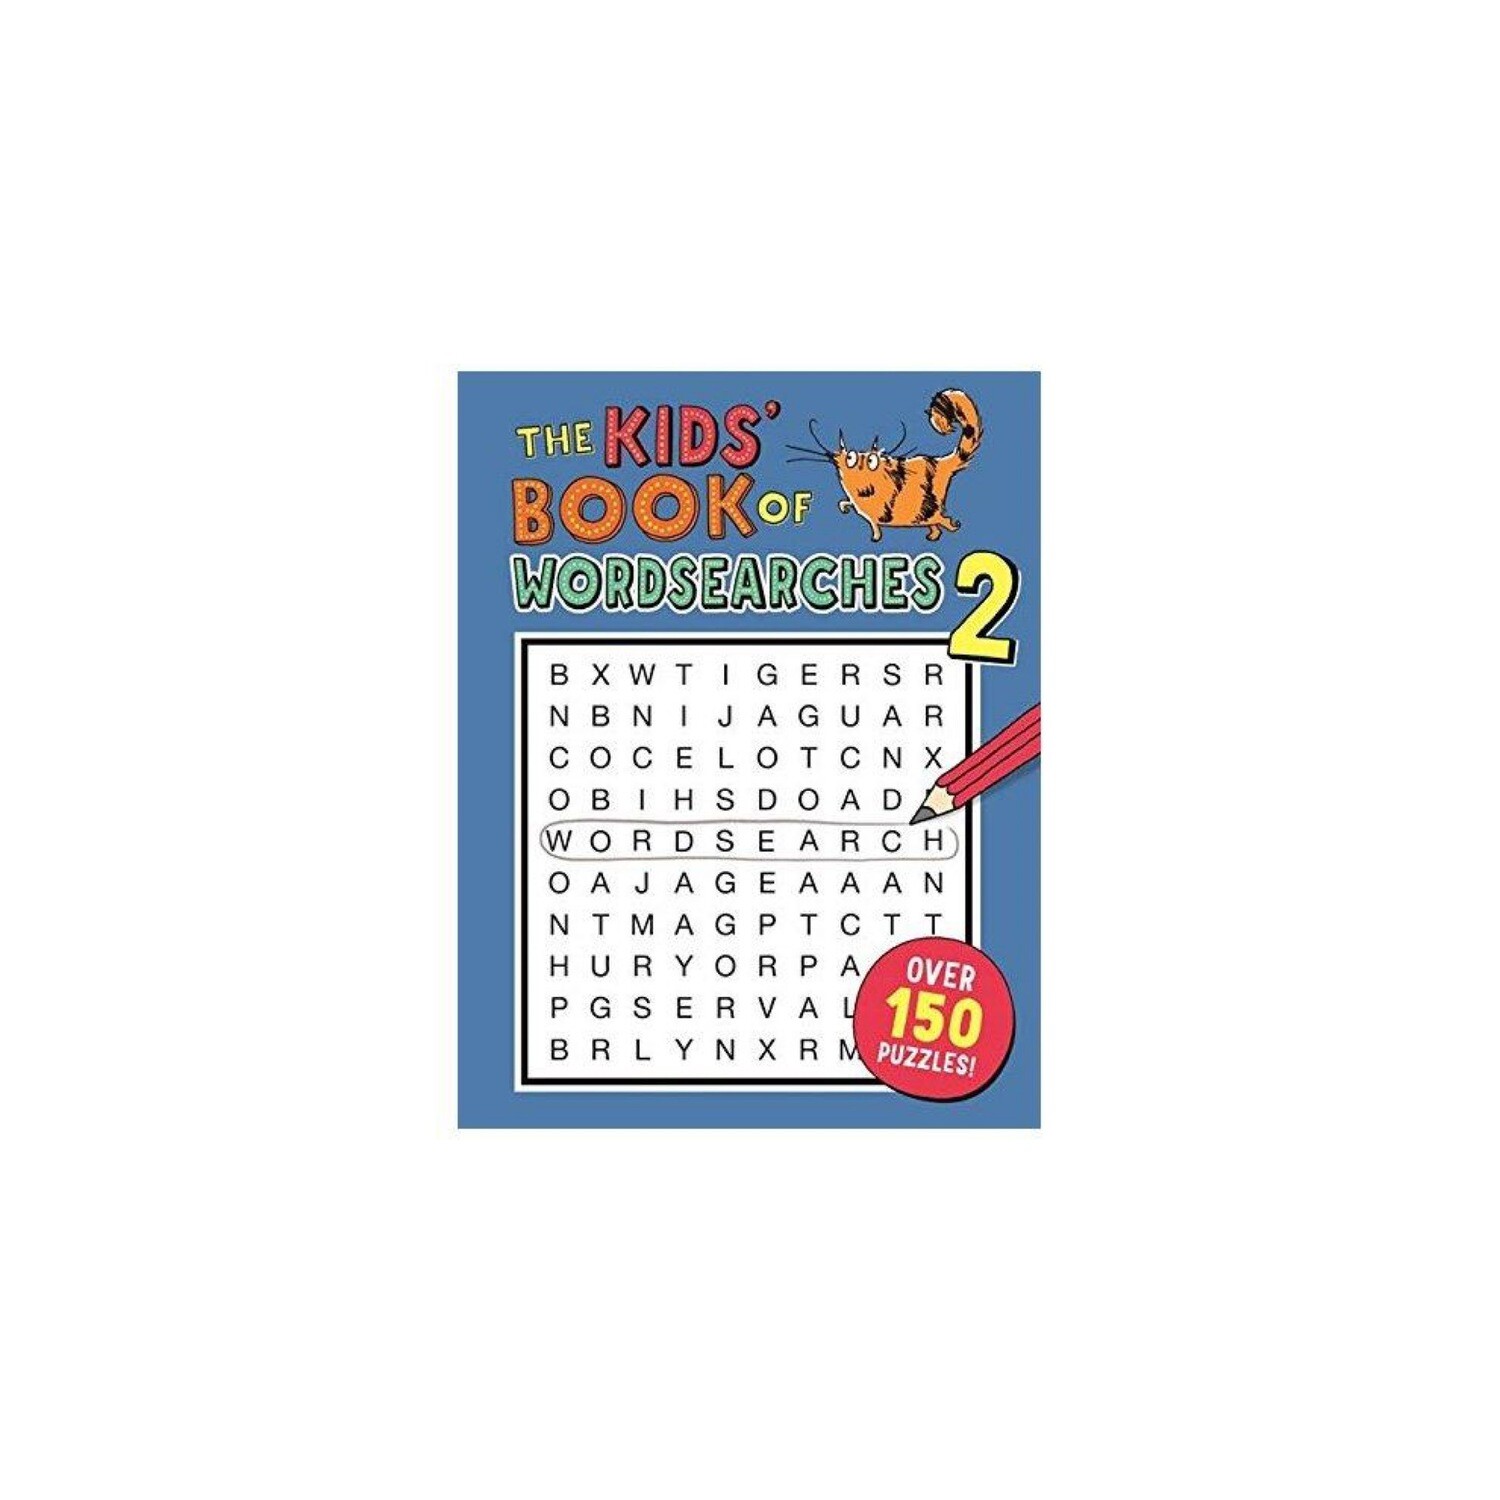 Kids Book of Wordsearches 2, Moore, Gareth, B.SC, M.Phil, Ph.D